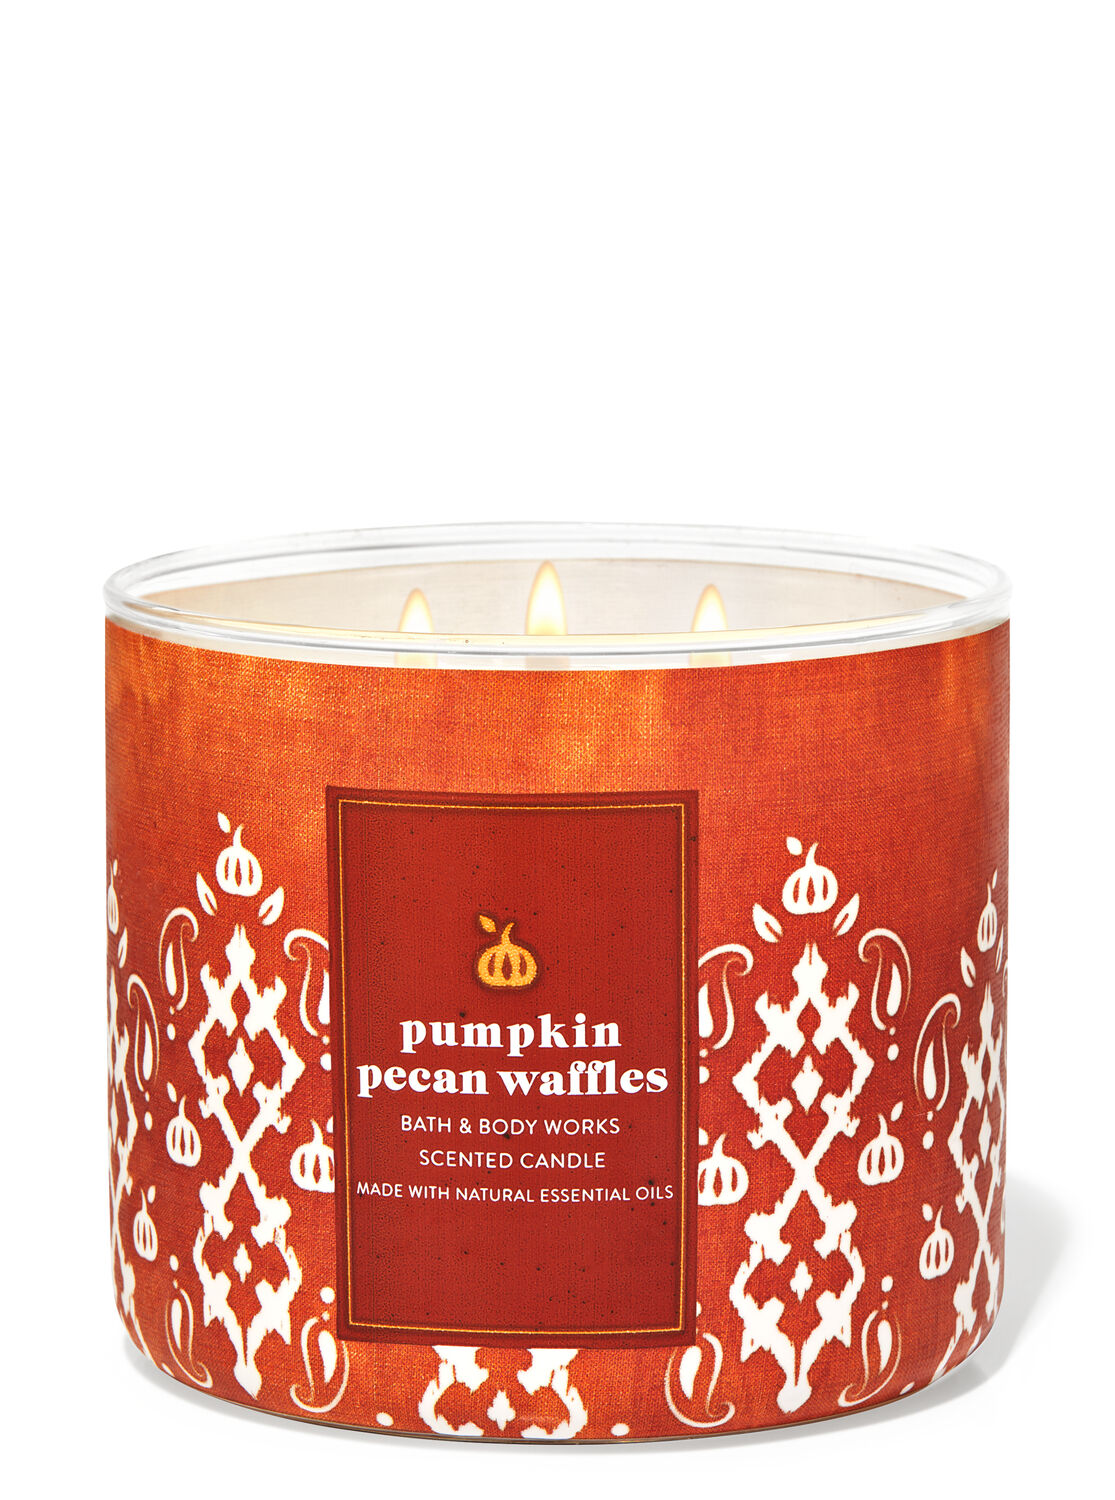 NEW BATH & BODY WORKS PUMPKIN PECAN WAFFLES SCENTED CANDLE 3 WICK 14.5OZ LARGE 